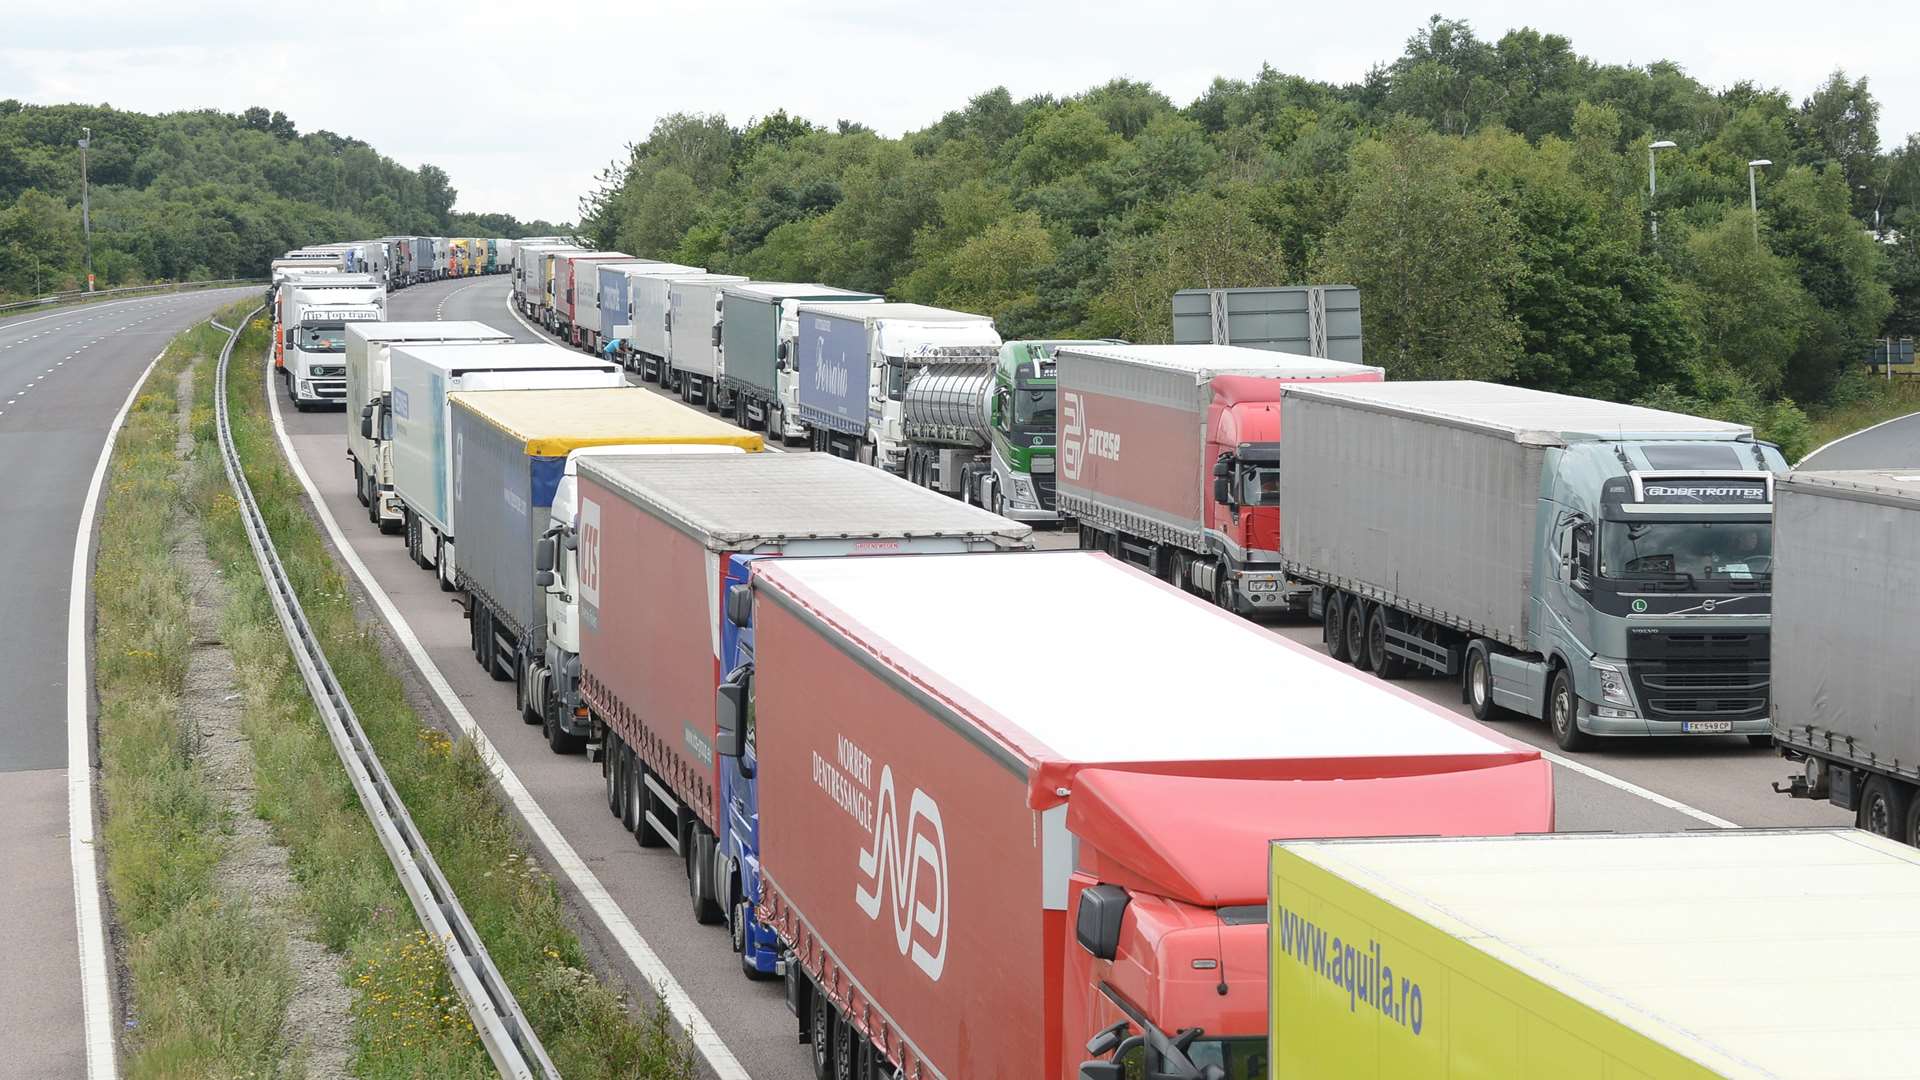 Operation Stack on the M20, July 2015